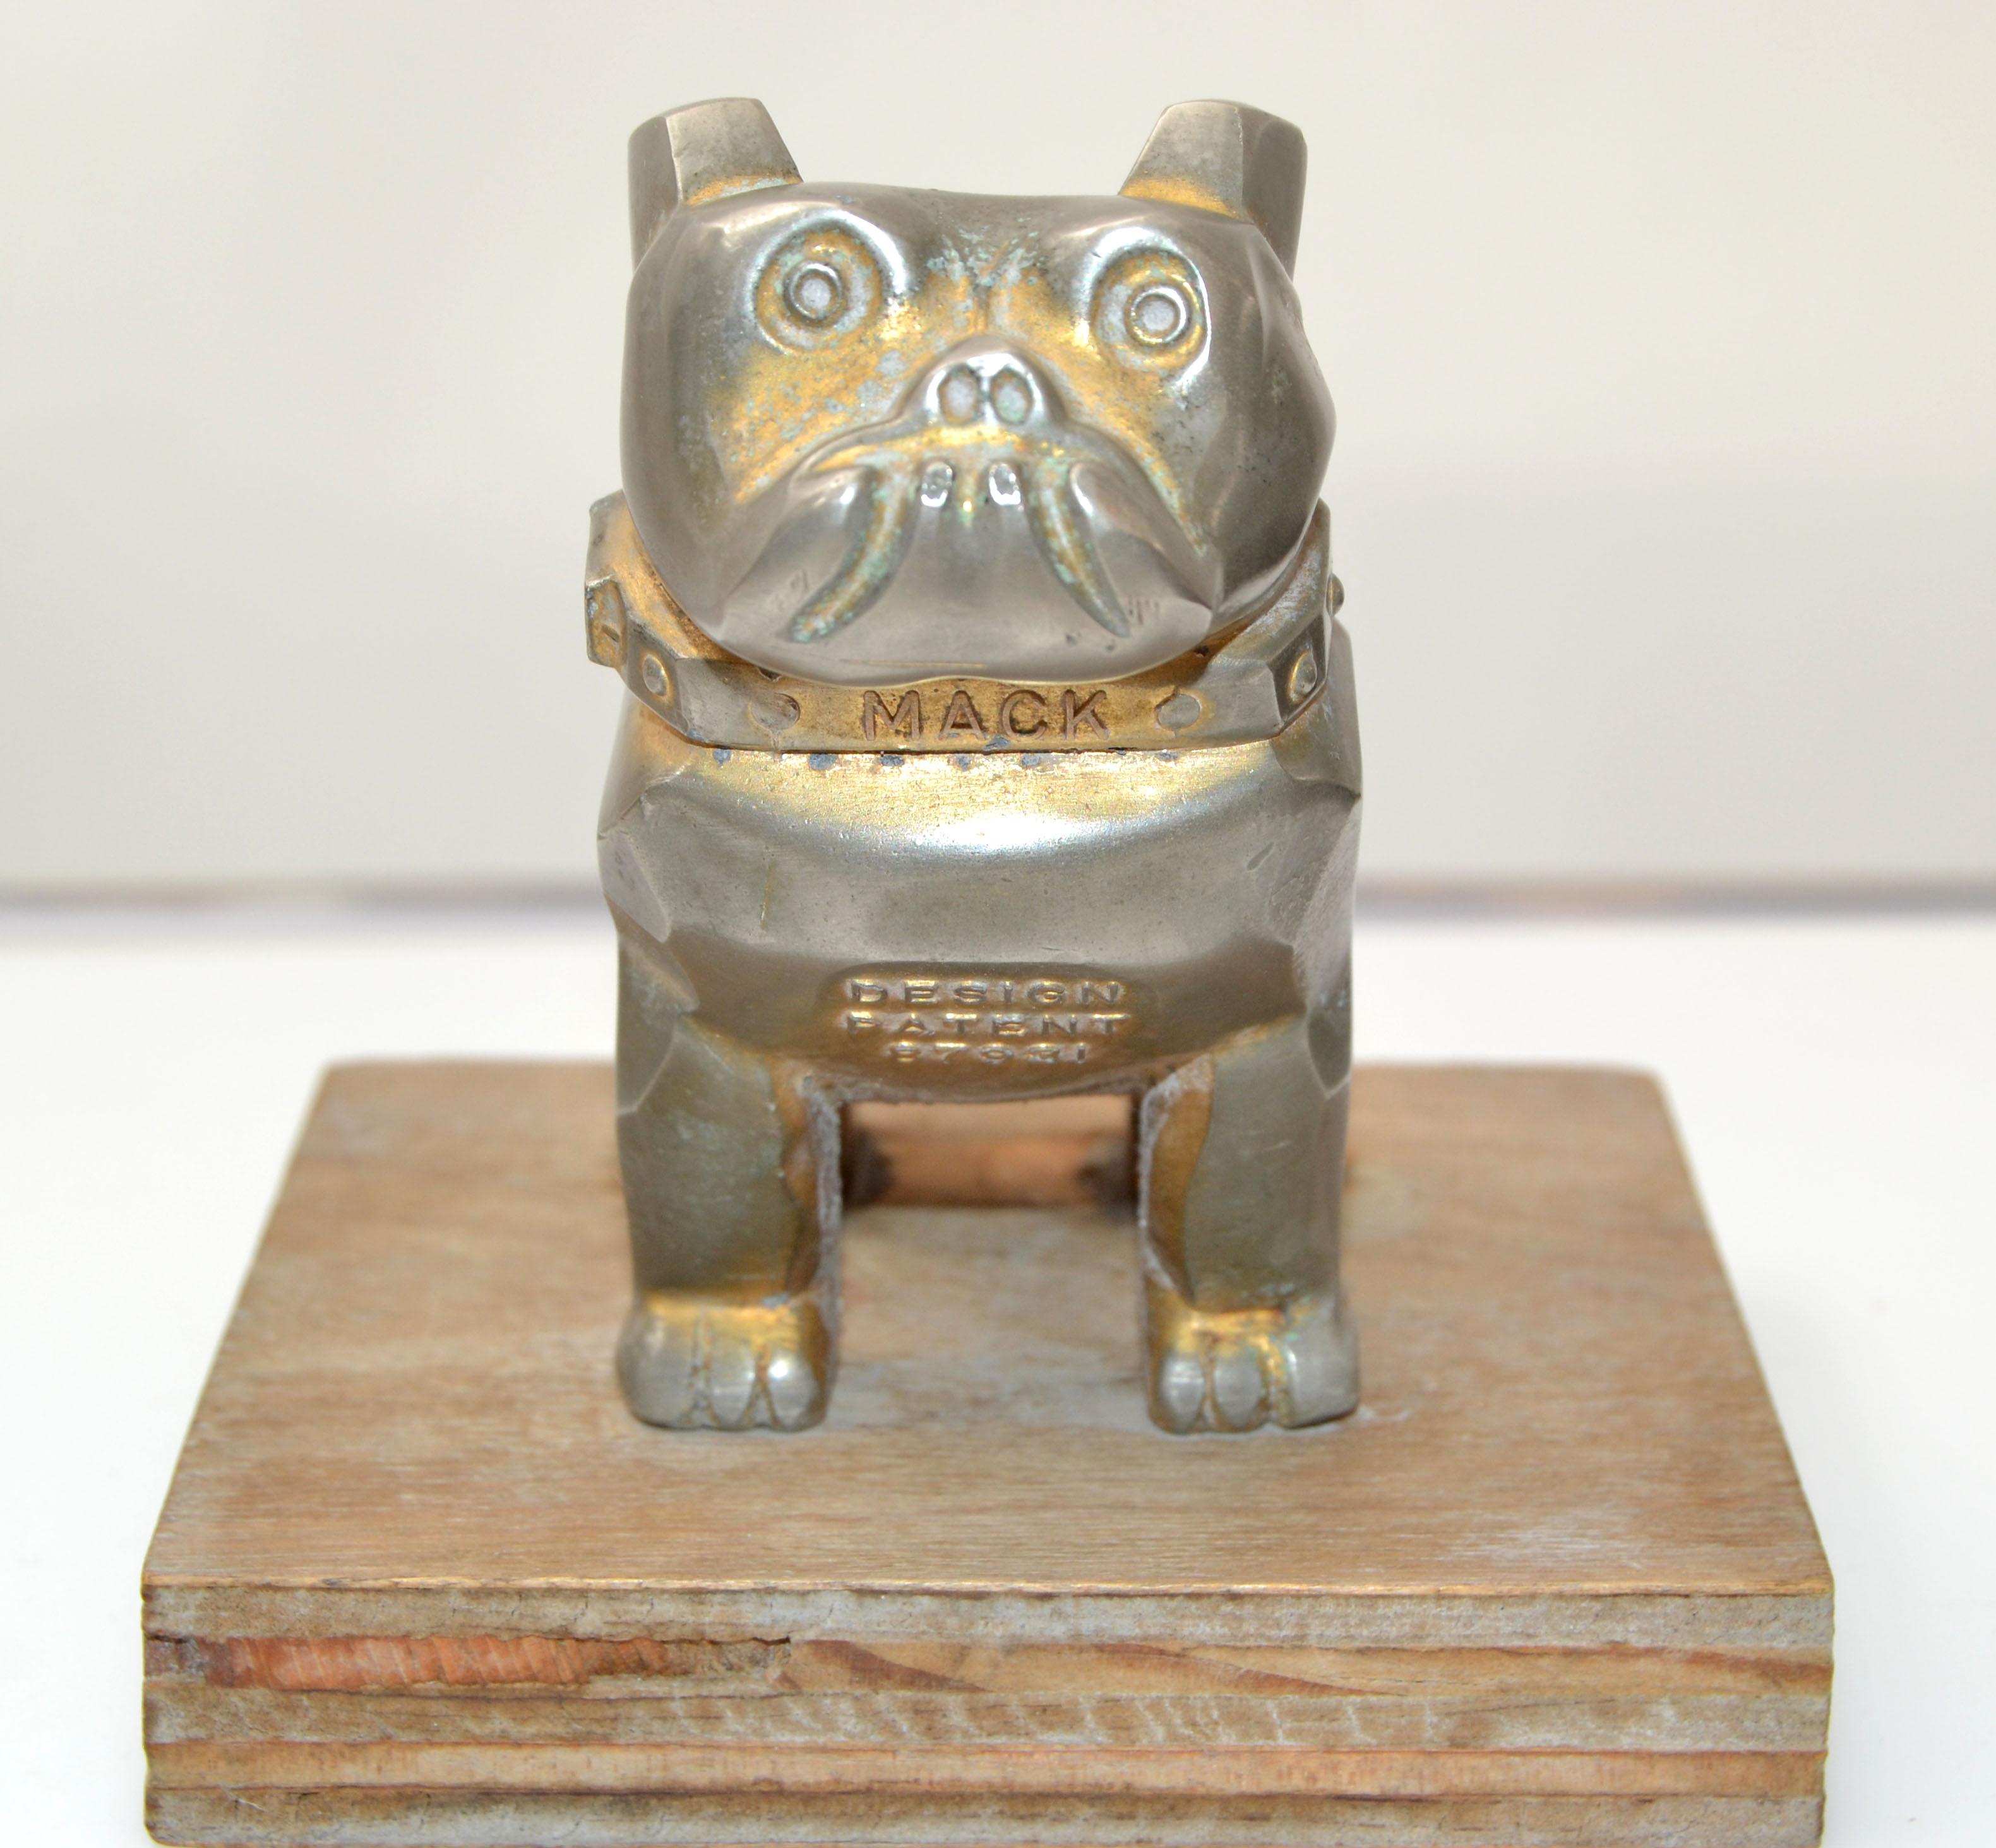 Vintage Design Patent Mack trucks bull dog figurine, statue, animal sculpture.
Silvered Bronze Bull Dog mounted on a wooden Base.
Marked Mack, 87931, Design Patent.
Base measures: 4.25 x 4.25 x 0.75 inches.